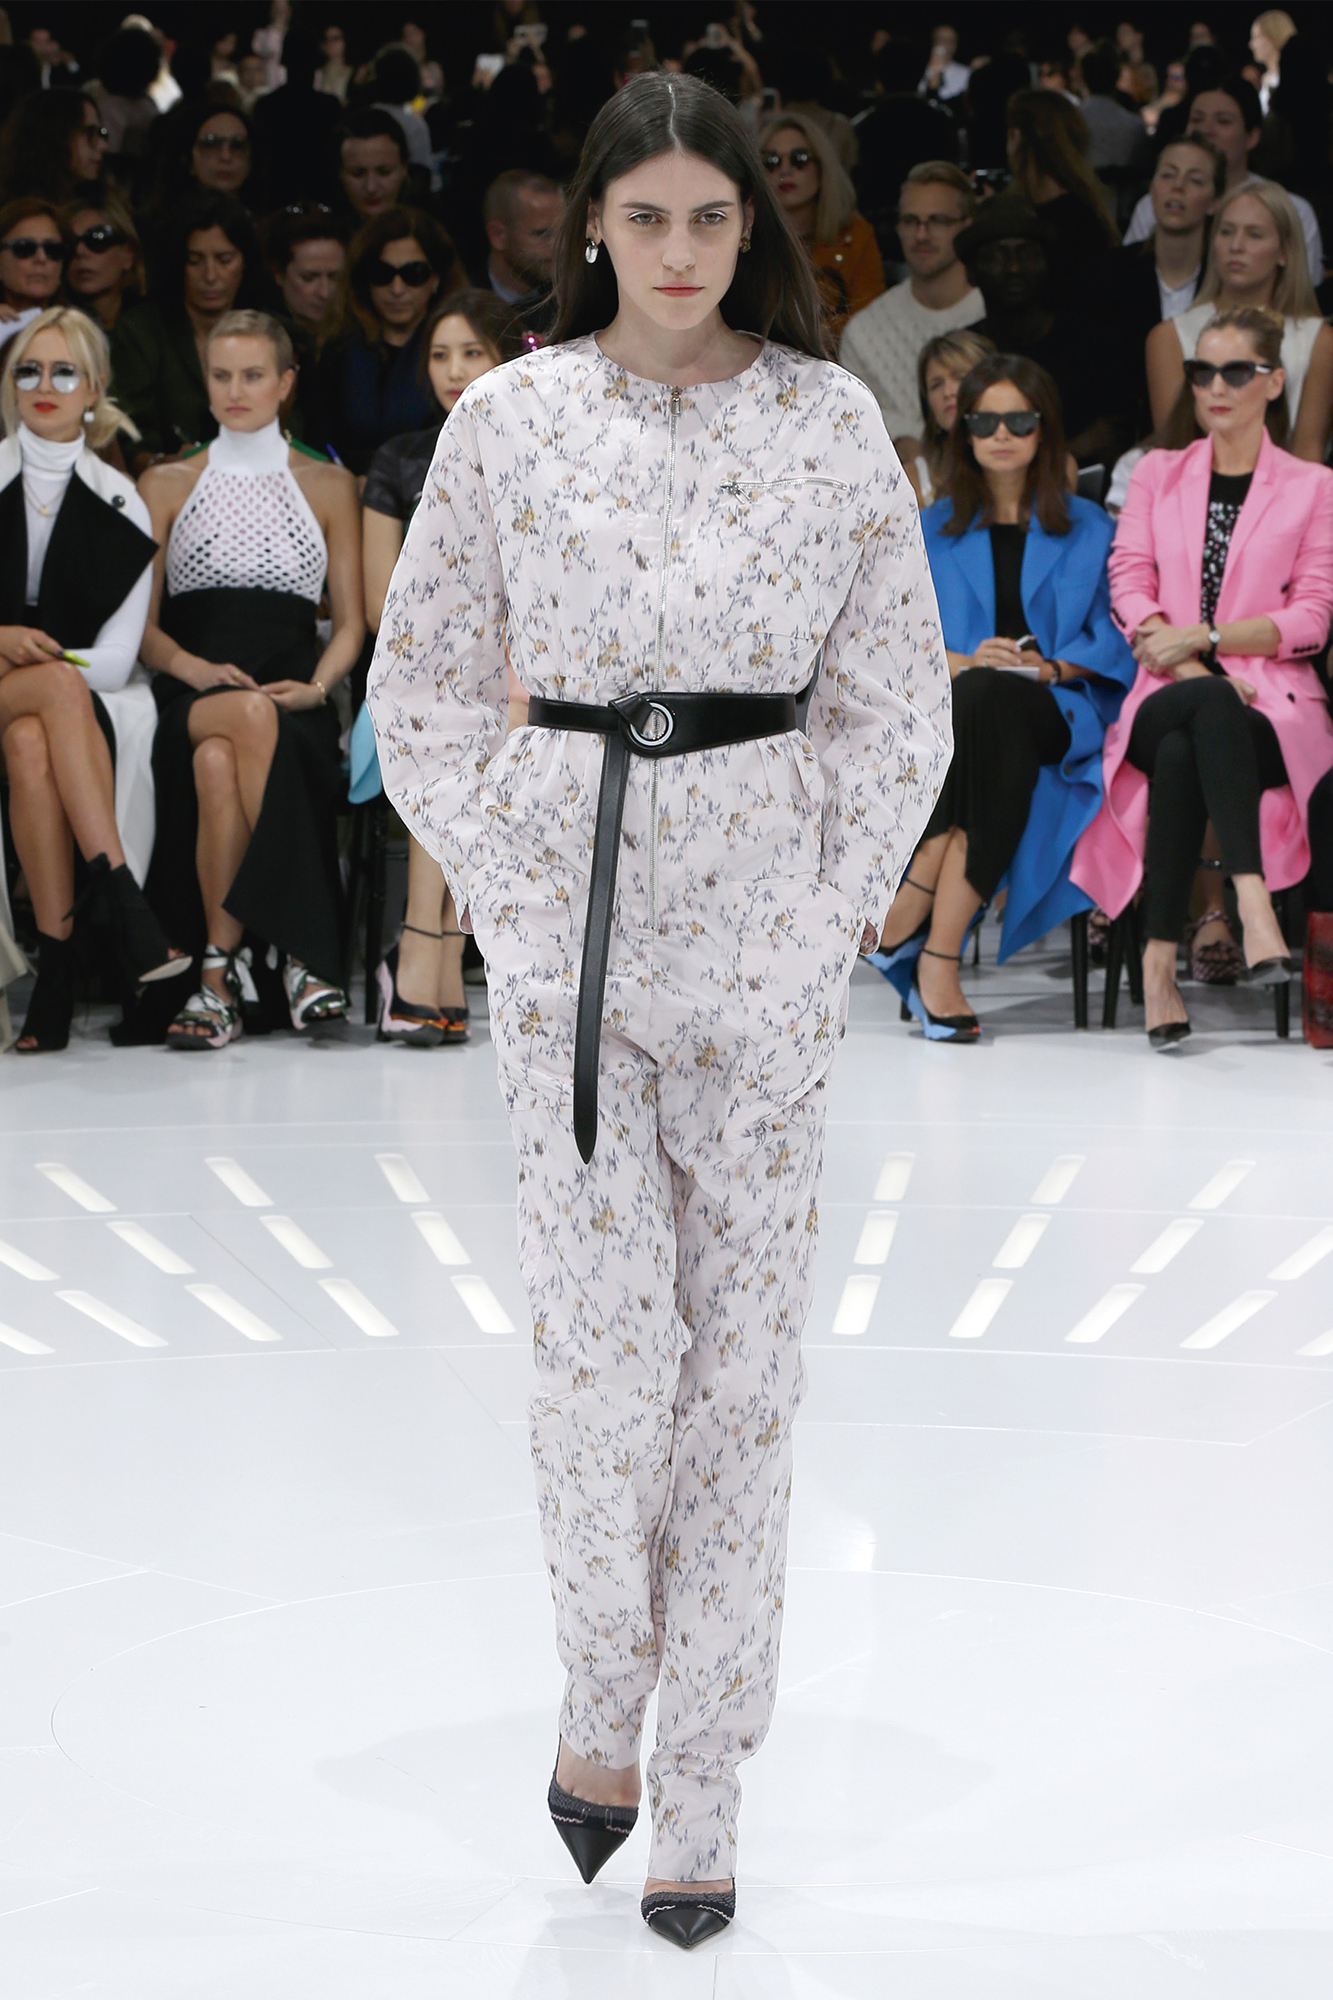 Christian Dior Haute Couture Spring-Summer Ready To Wear Dresses & Accessories Collection 2015-16 (17)